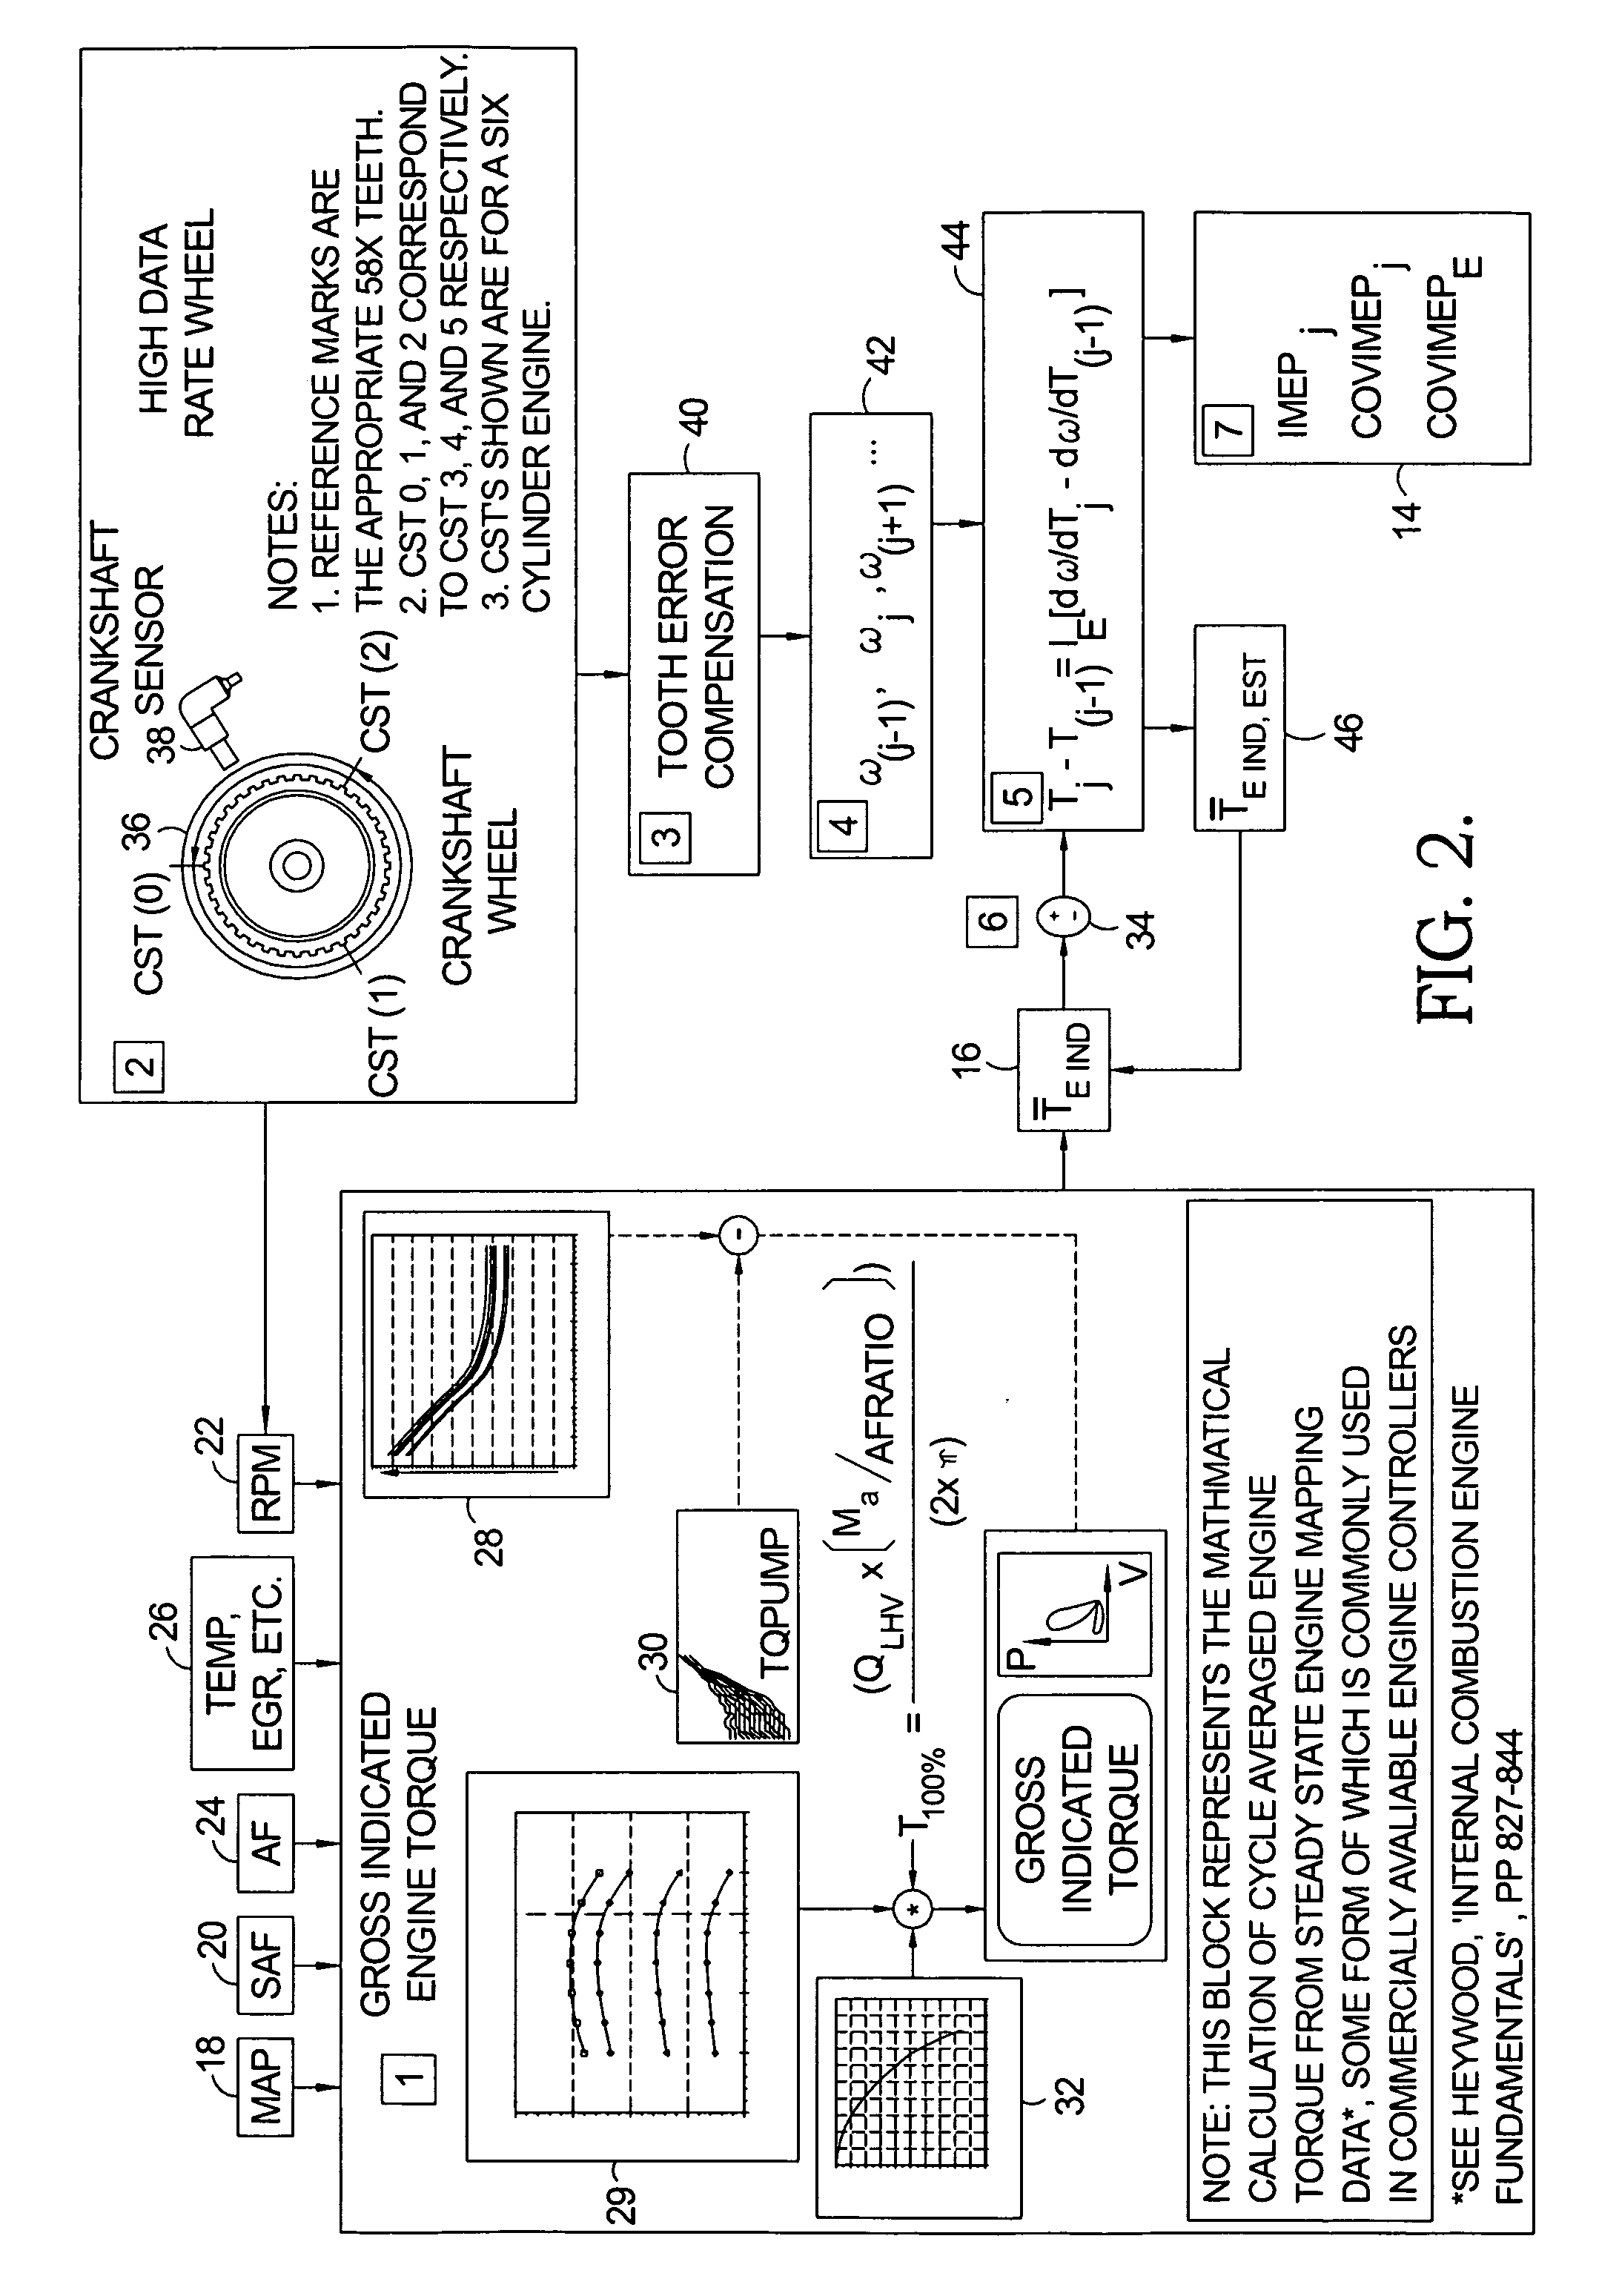 Method for estimation of indicated mean effective pressure for individual cylinders from crankshaft acceleration